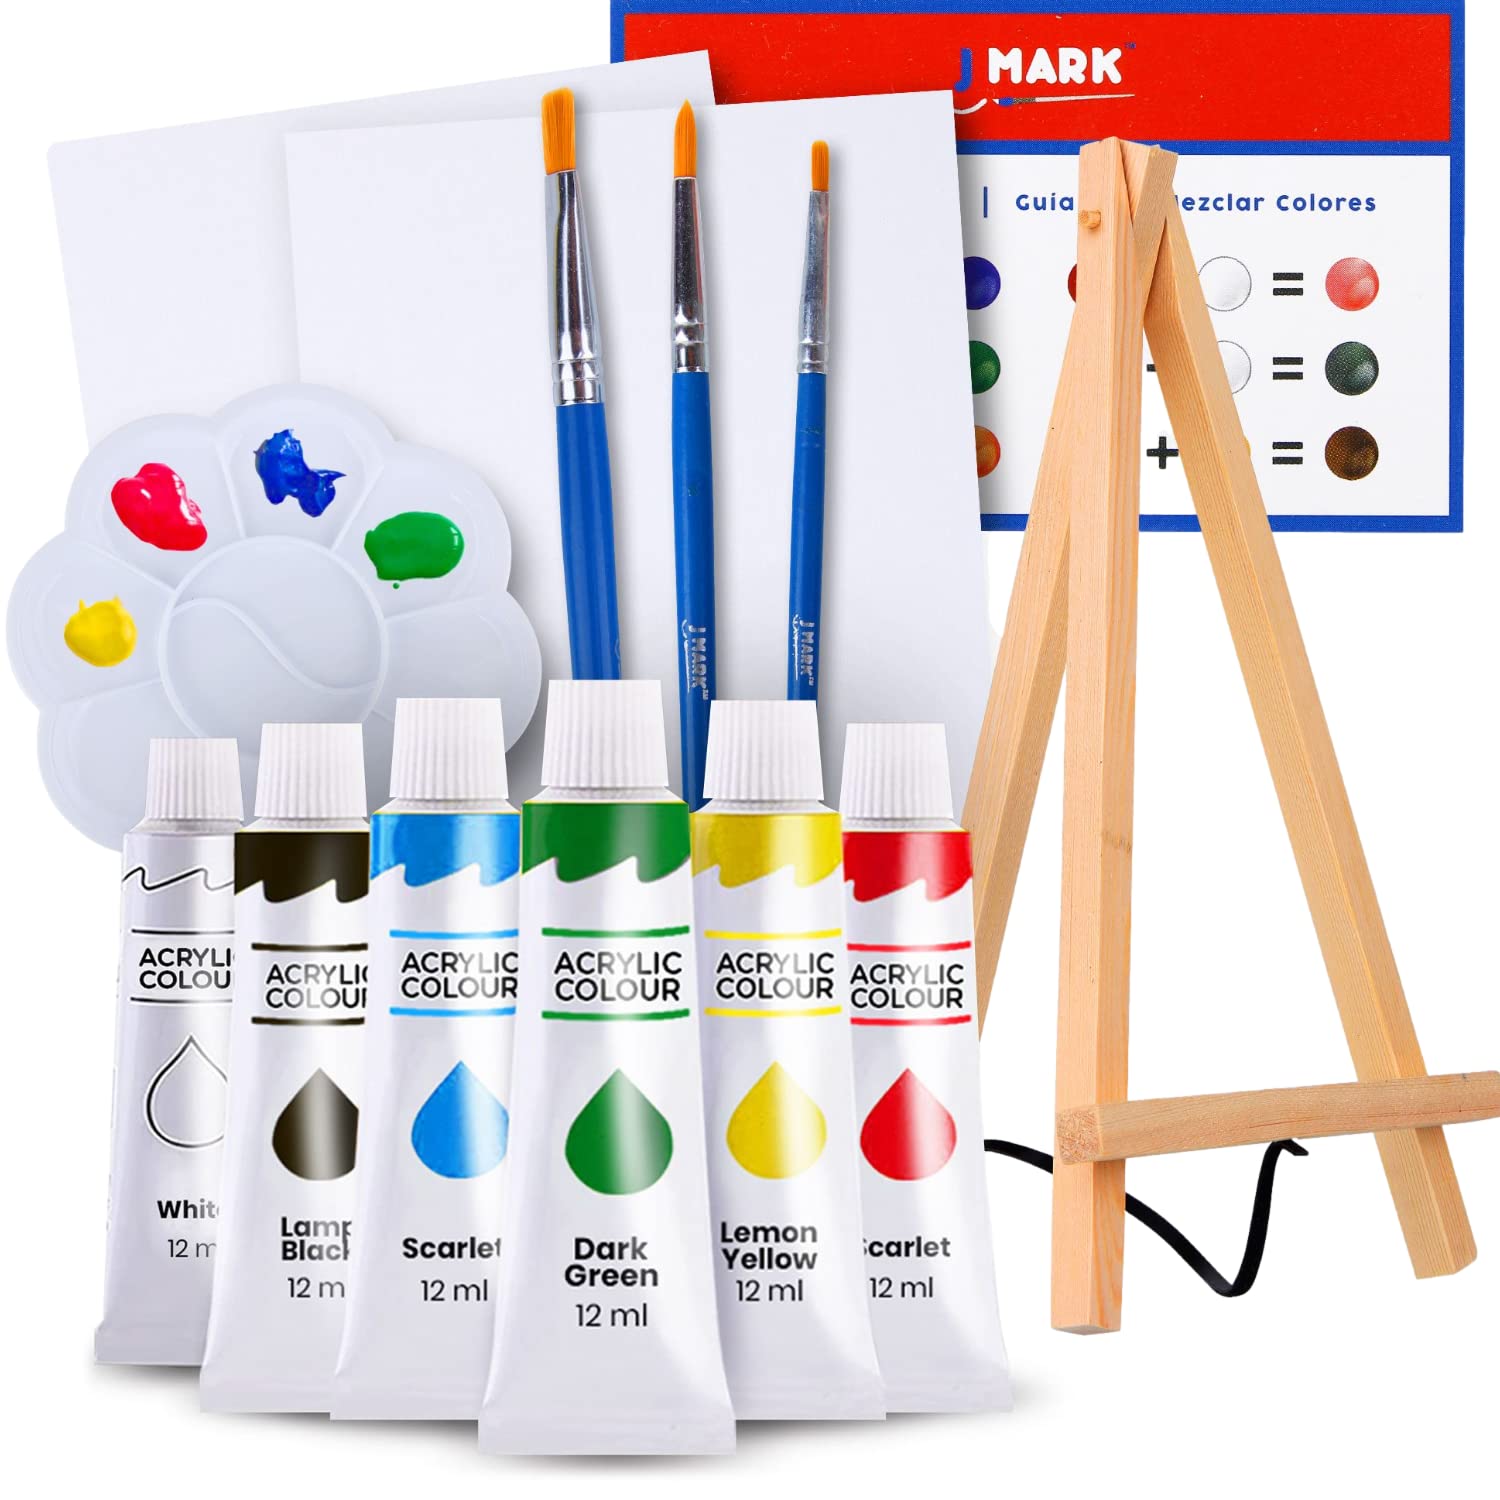 Artkey Pre Drawn Canvas for Painting for Kids, 5 x 7” Printed